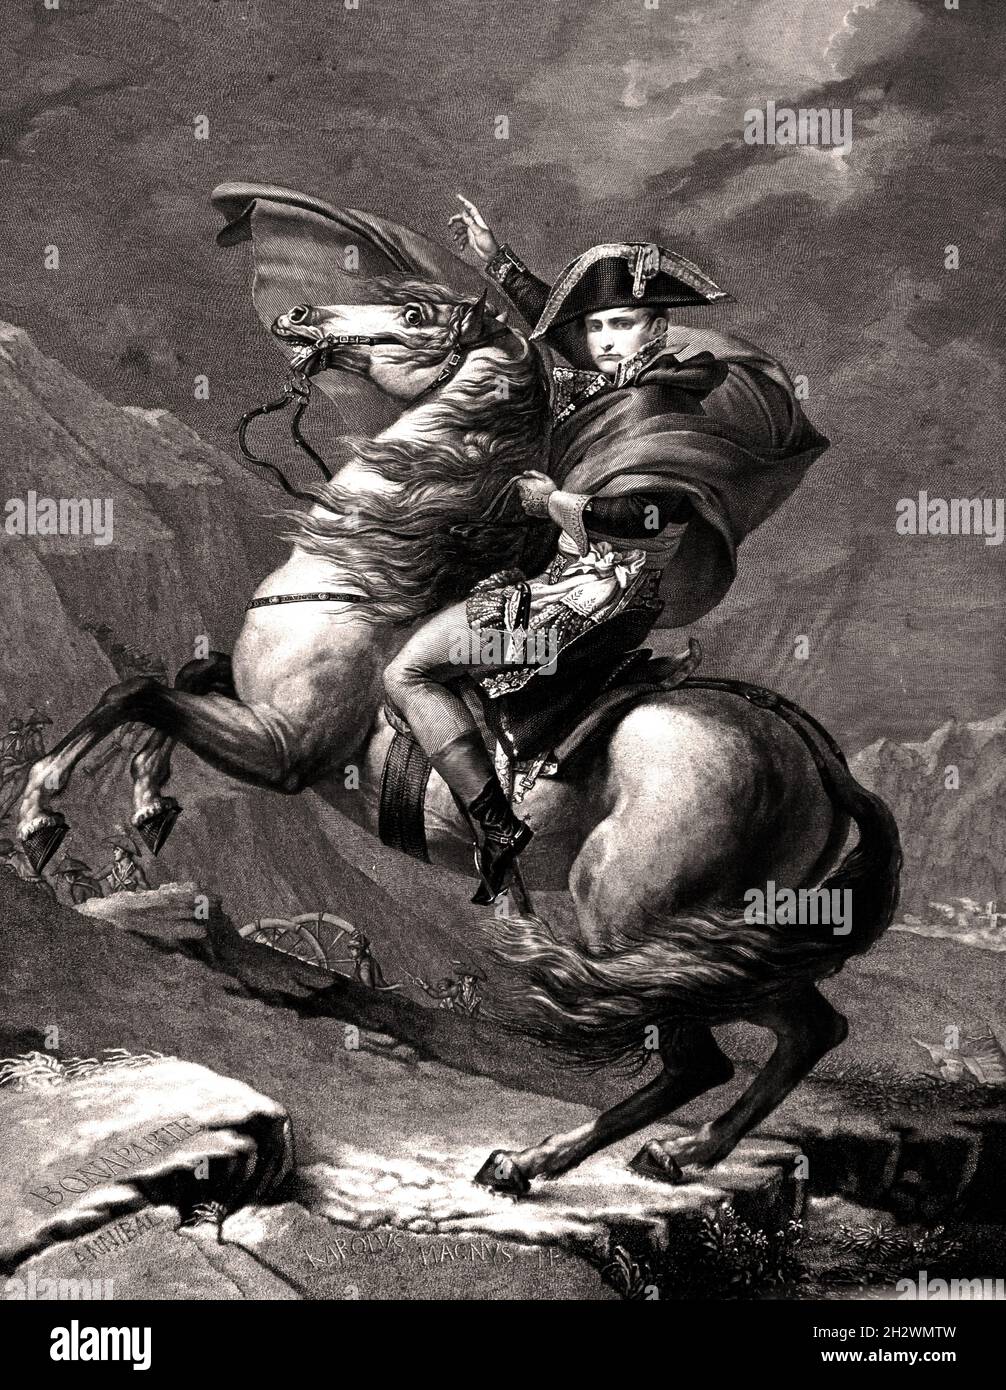 Napoleon at the Great St. Bernard Pass Jacques-Louis David1809 This famous painting of Napoleon t the Great St. Bernard Pass in May 1800 was intended to glorify him. The Charlemagne reference anticipated Bonaparte's dominance over all Europe. In reality, he crossed the pass on a mule. Napoleon, Napoleon Bonaparte, (1769–1821), Napoleon I, French Emperor,  France. Stock Photo